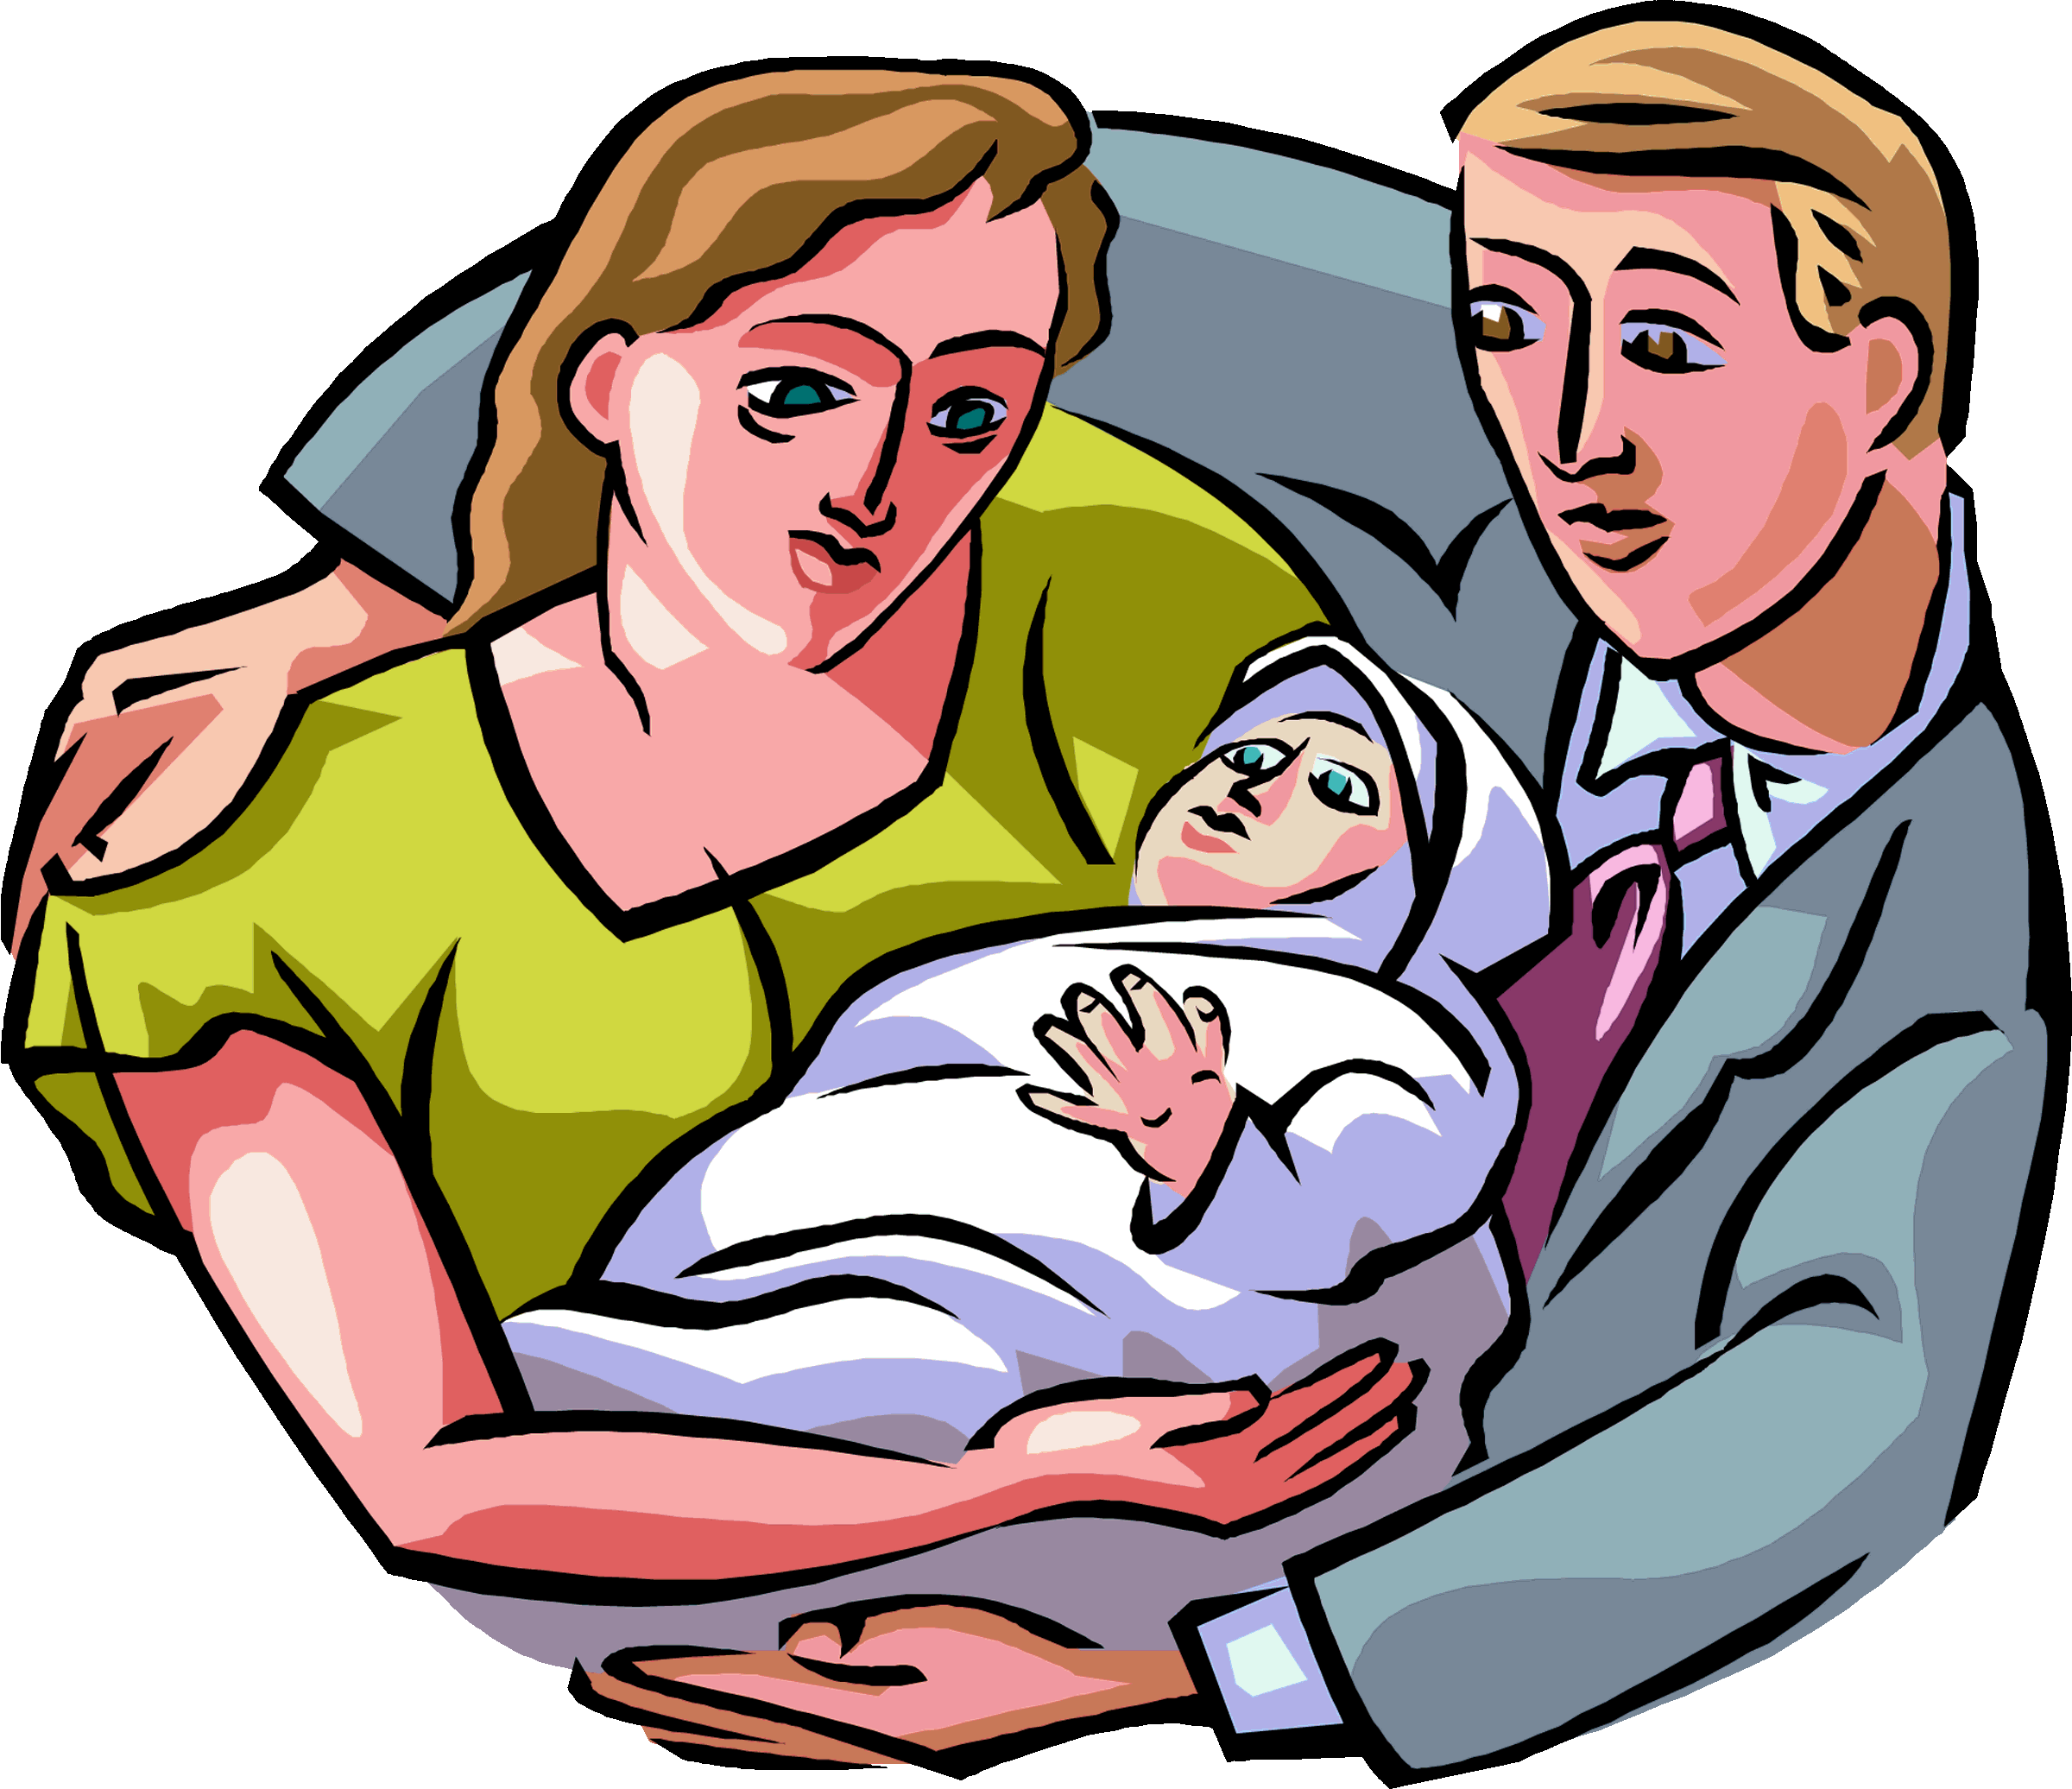 Family With Baby Clipart